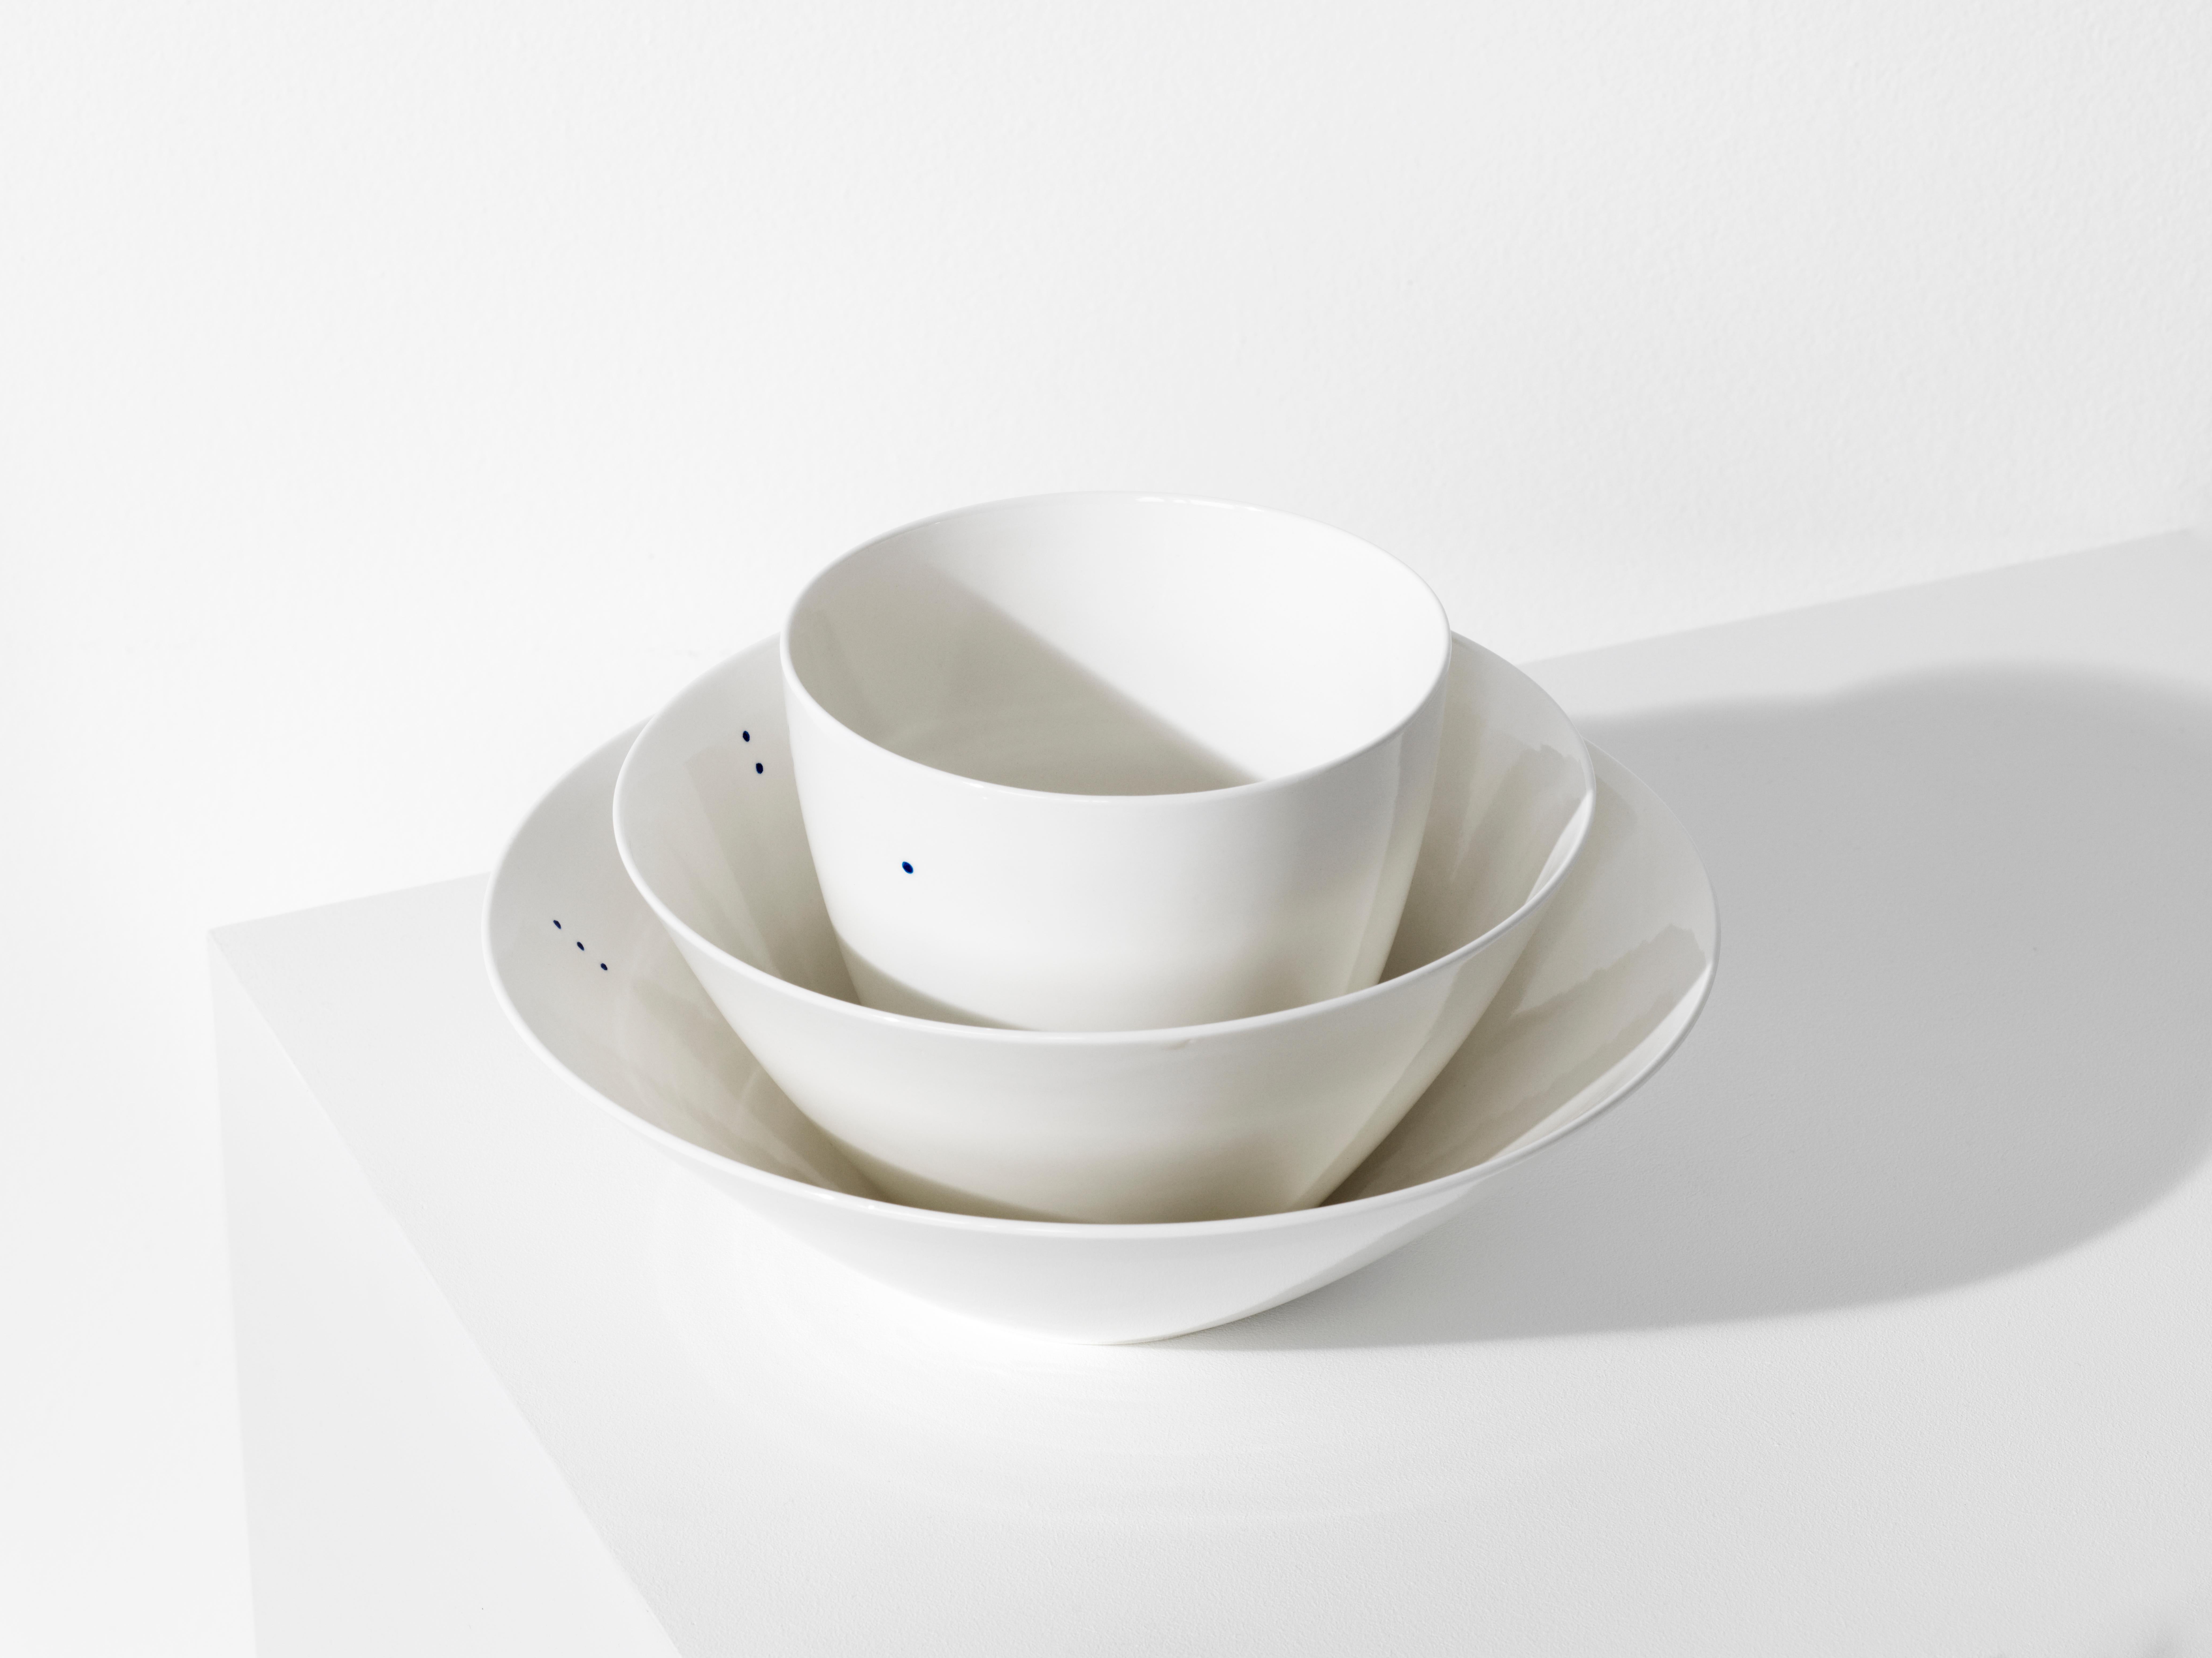 SHIRO is a collection of simple and sculptural bowls that are designed to contain all kinds of foods and drinks. Each of the three shapes comes in two sizes – a small and a large. 

Shiro is the Japanese word for white. The little indigo blue dot is